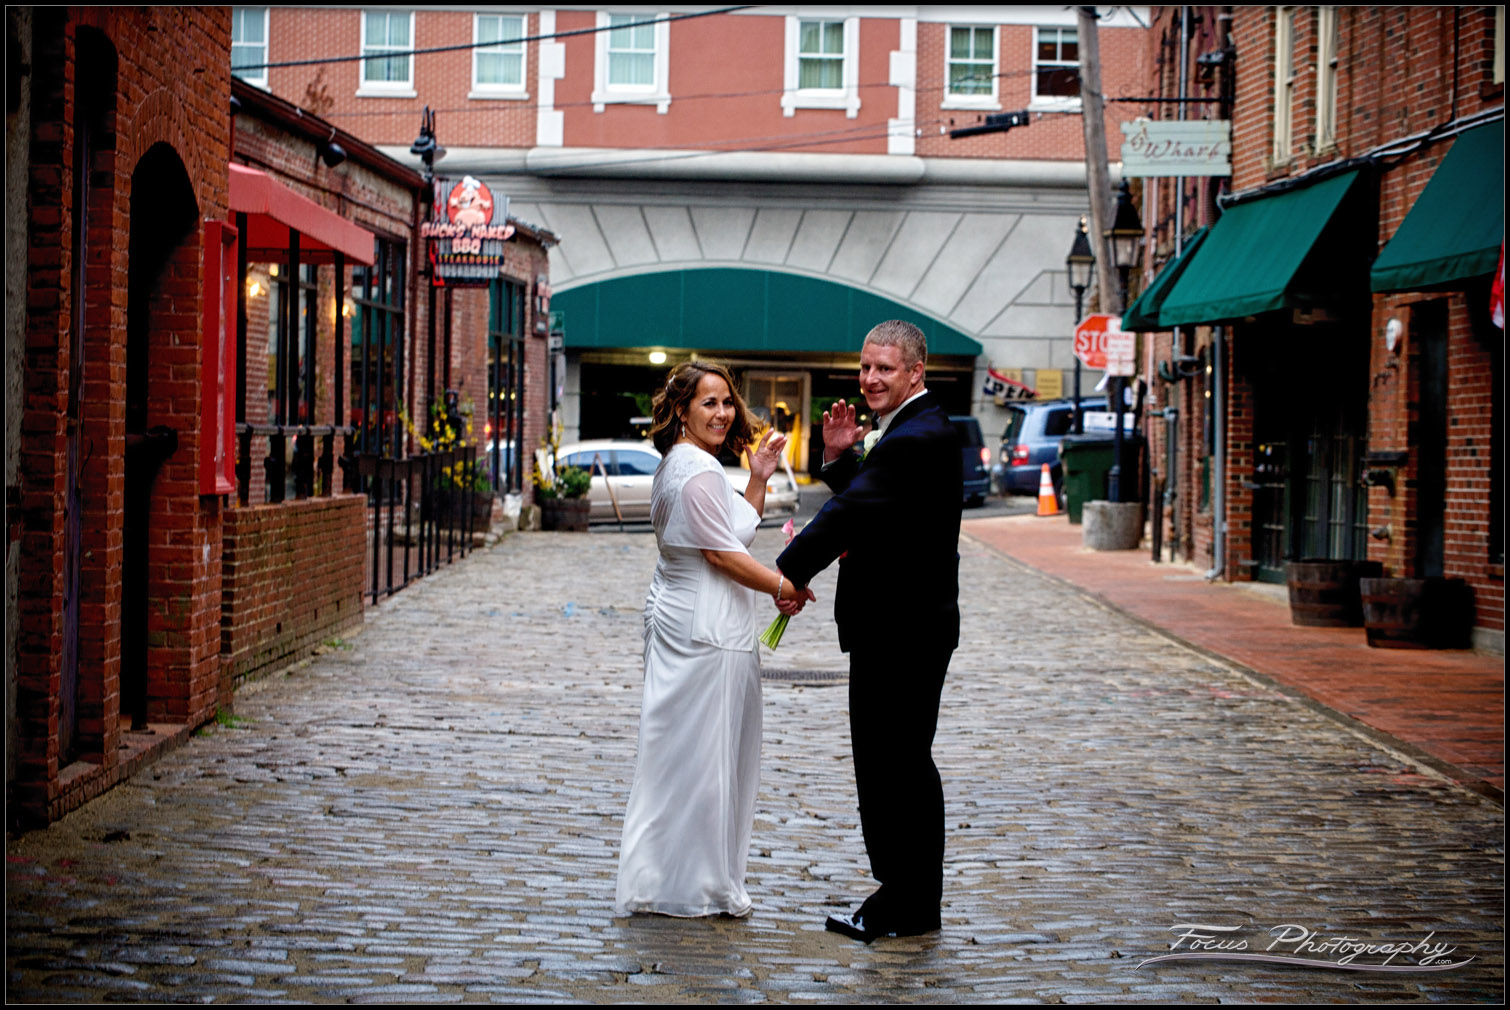 Portland Maine Wedding photographers Will and Lucia captured Pam and Mike's wedding